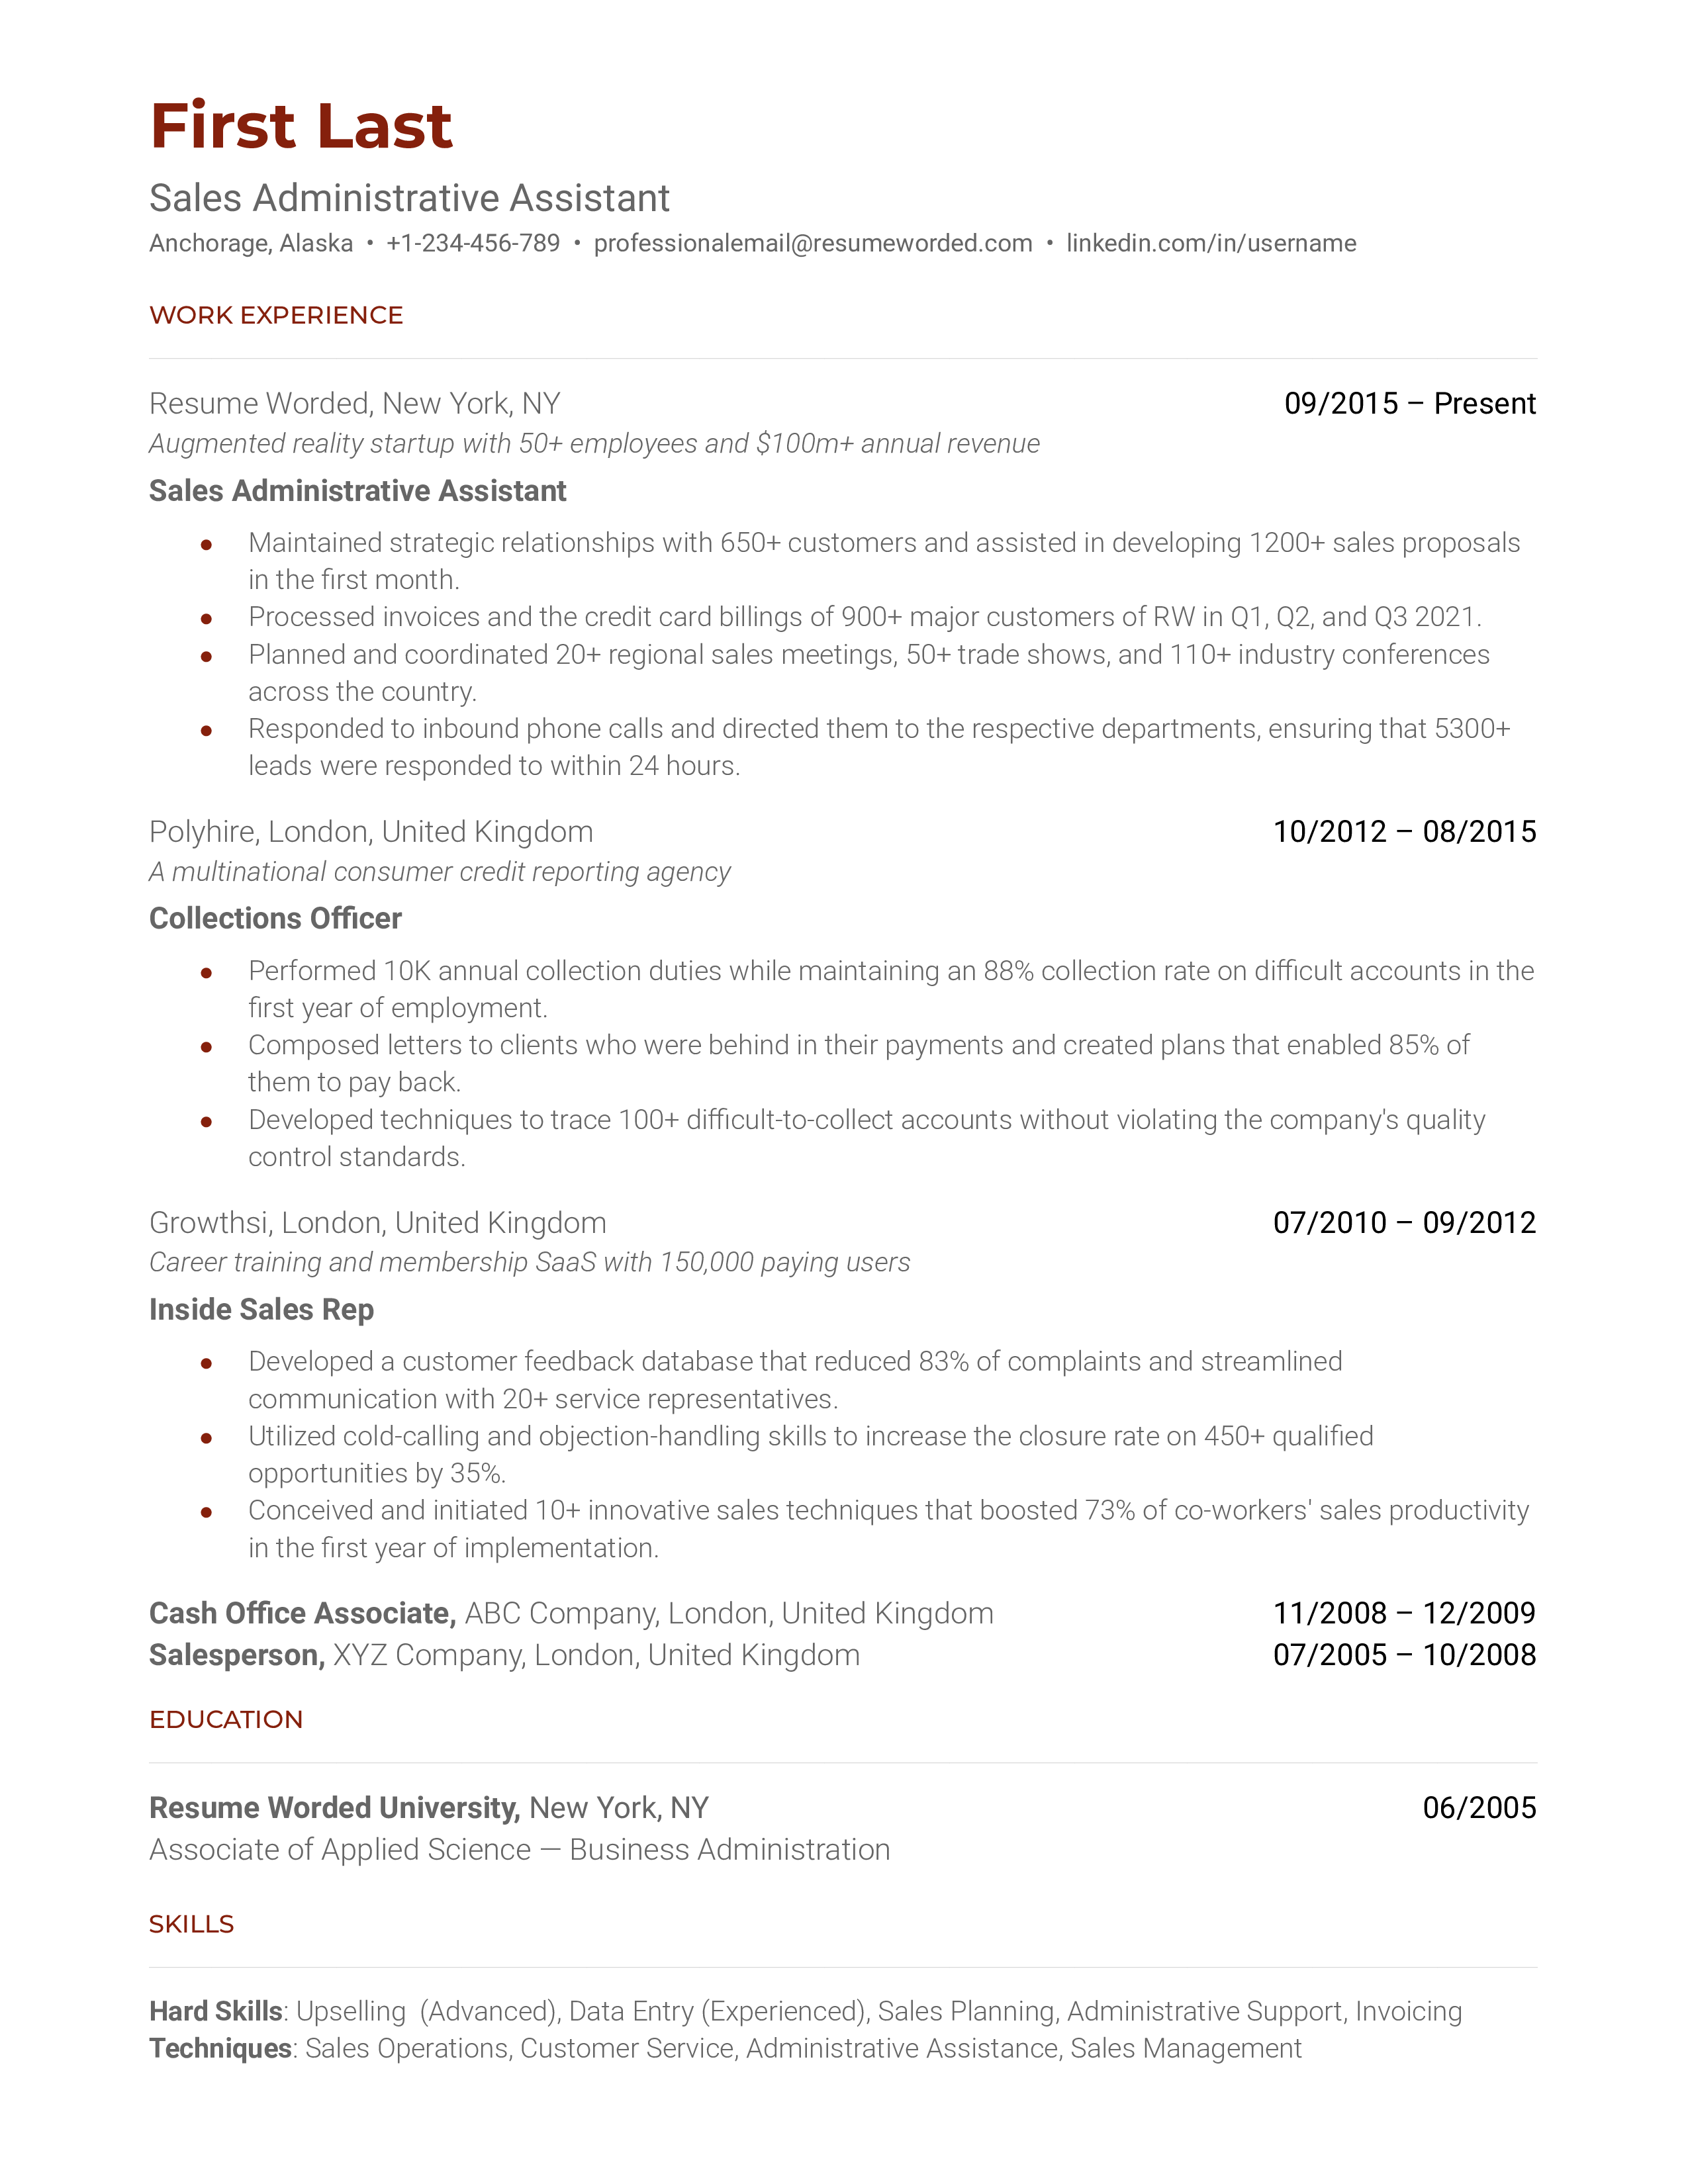 A resume for a sales administrative assistant with a bachelor's degree and experience as a sales clerk and sales coordinator.